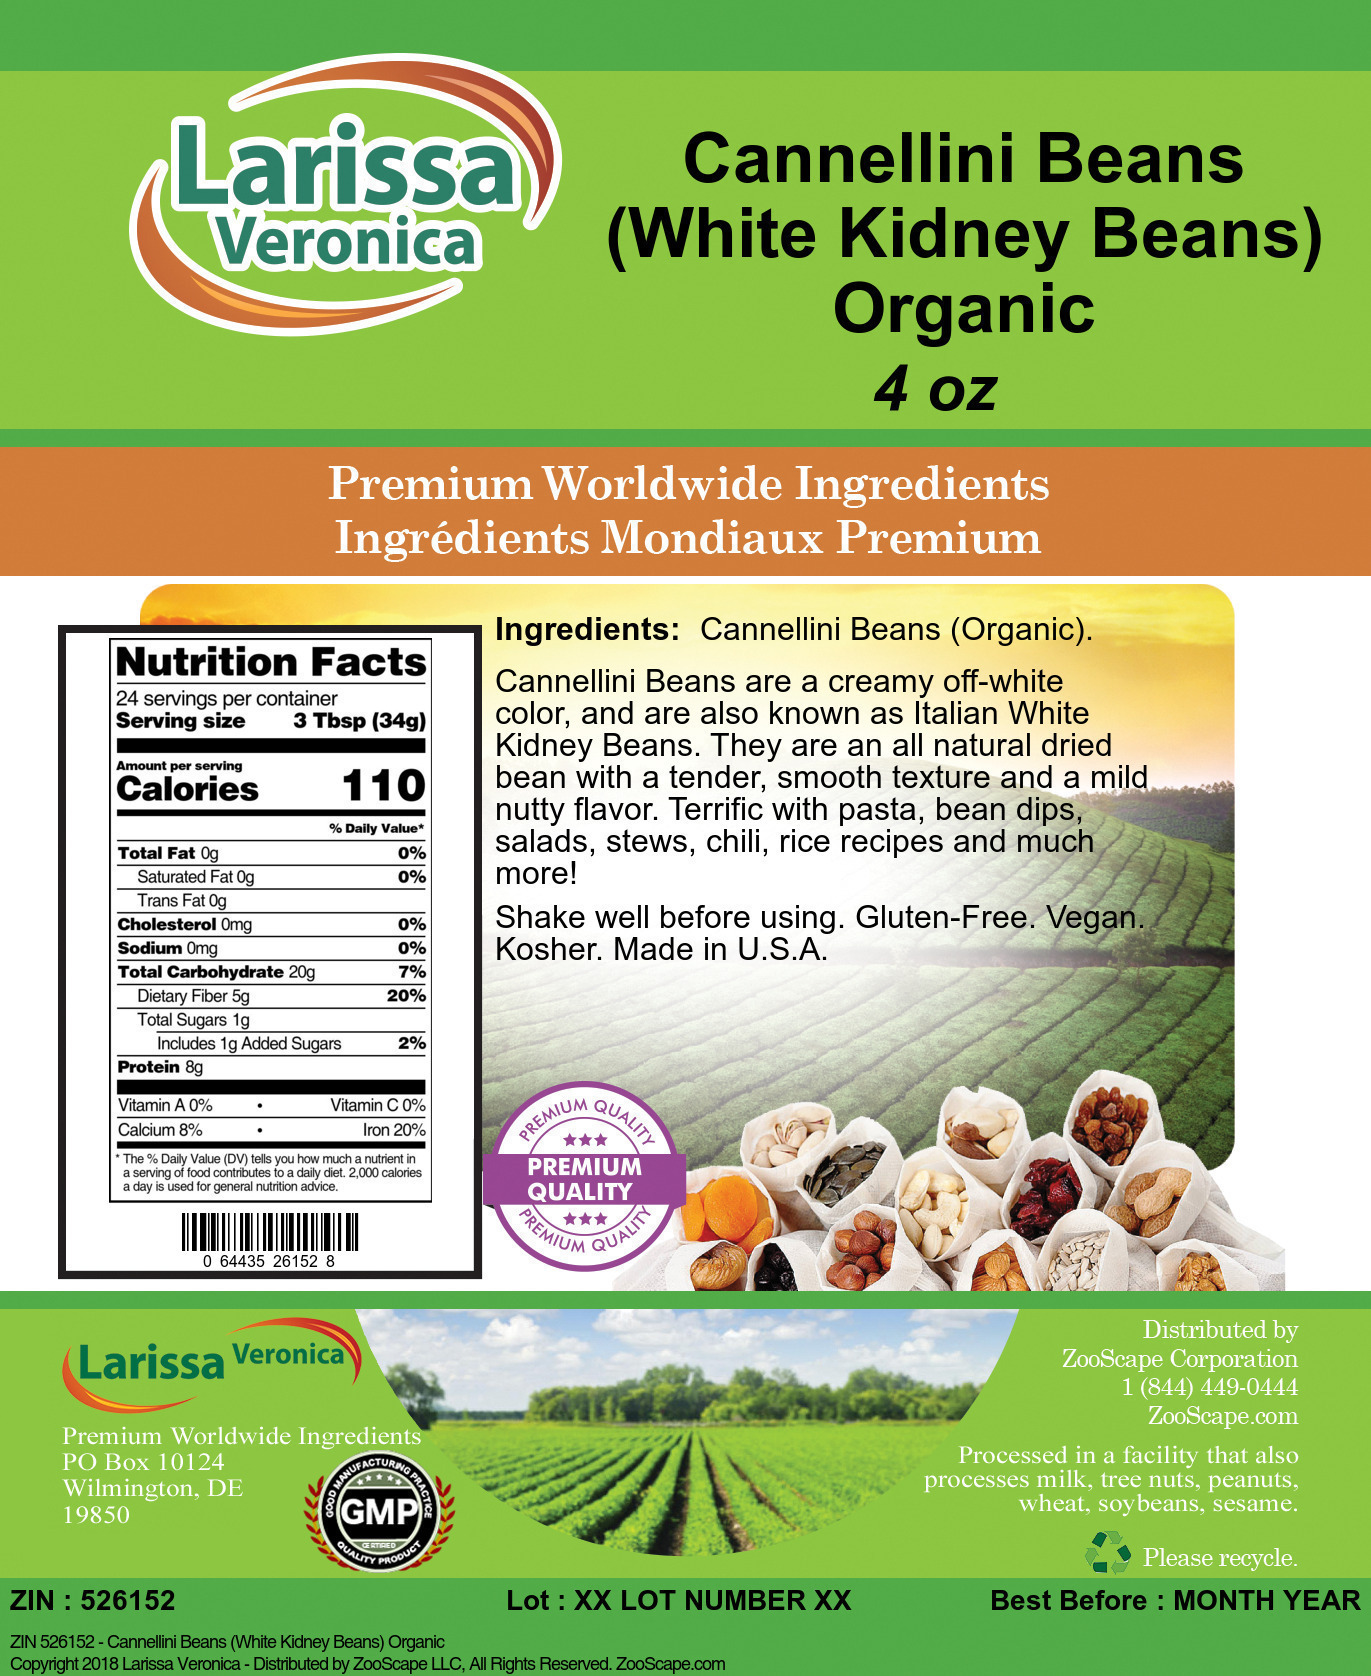 Cannellini Beans (White Kidney Beans) Organic - Label